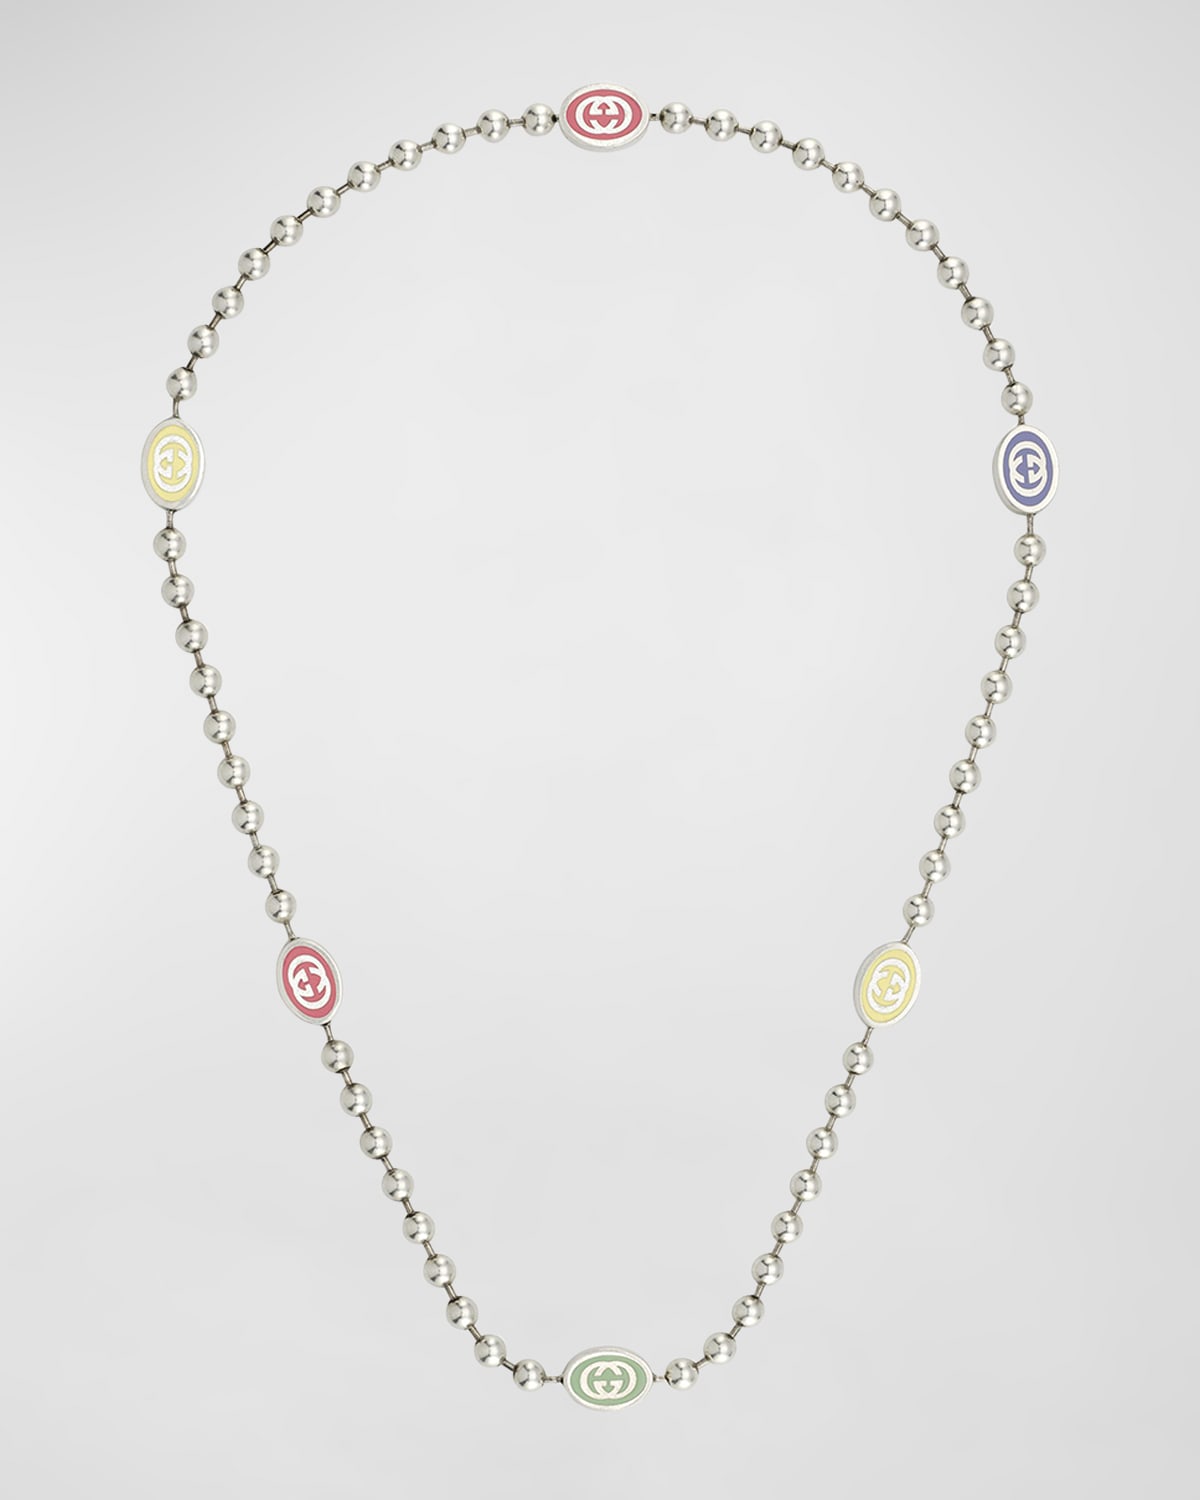 GUCCI INTERLOCKING G STERLING SILVER BOULE NECKLACE